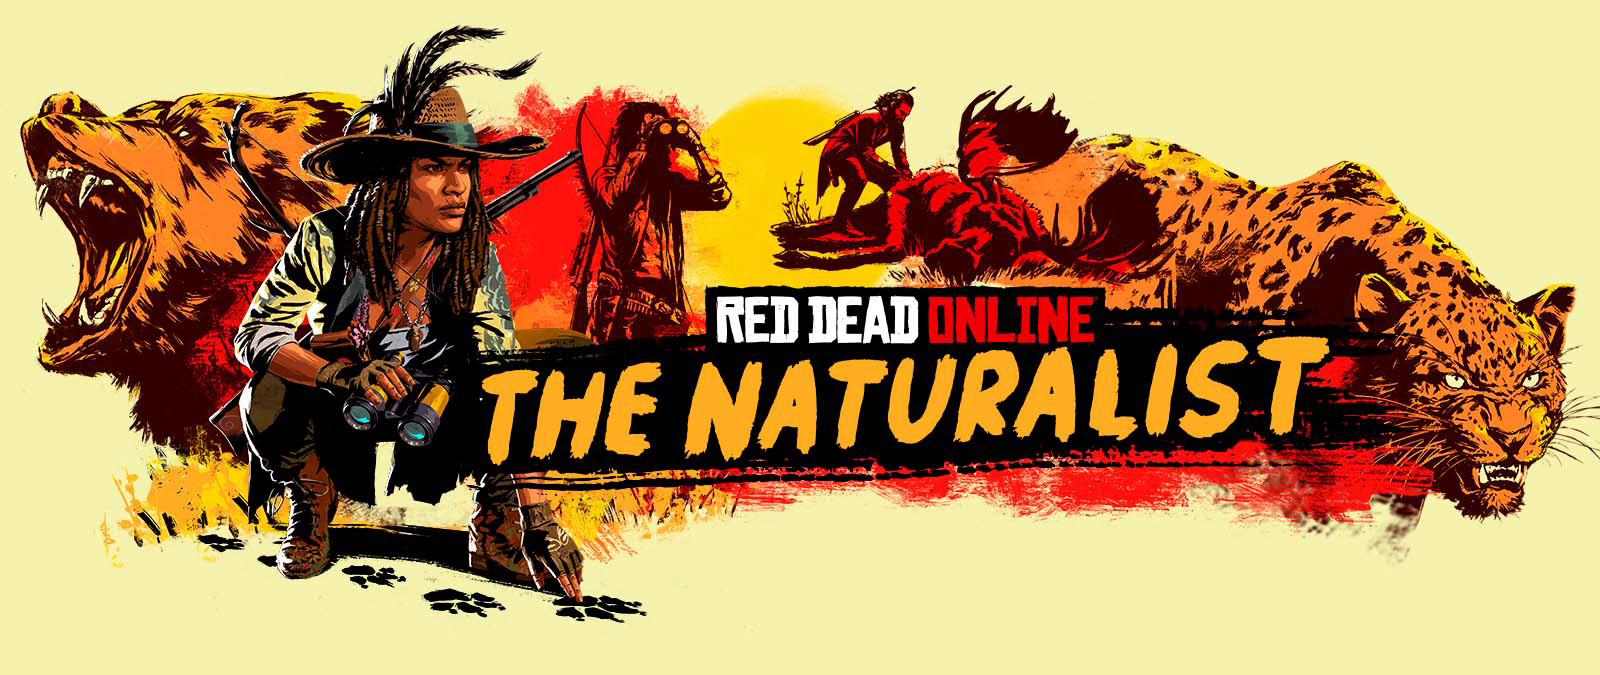 Red Dead Online. The Naturalist. Characters tracking and hunting large animals.